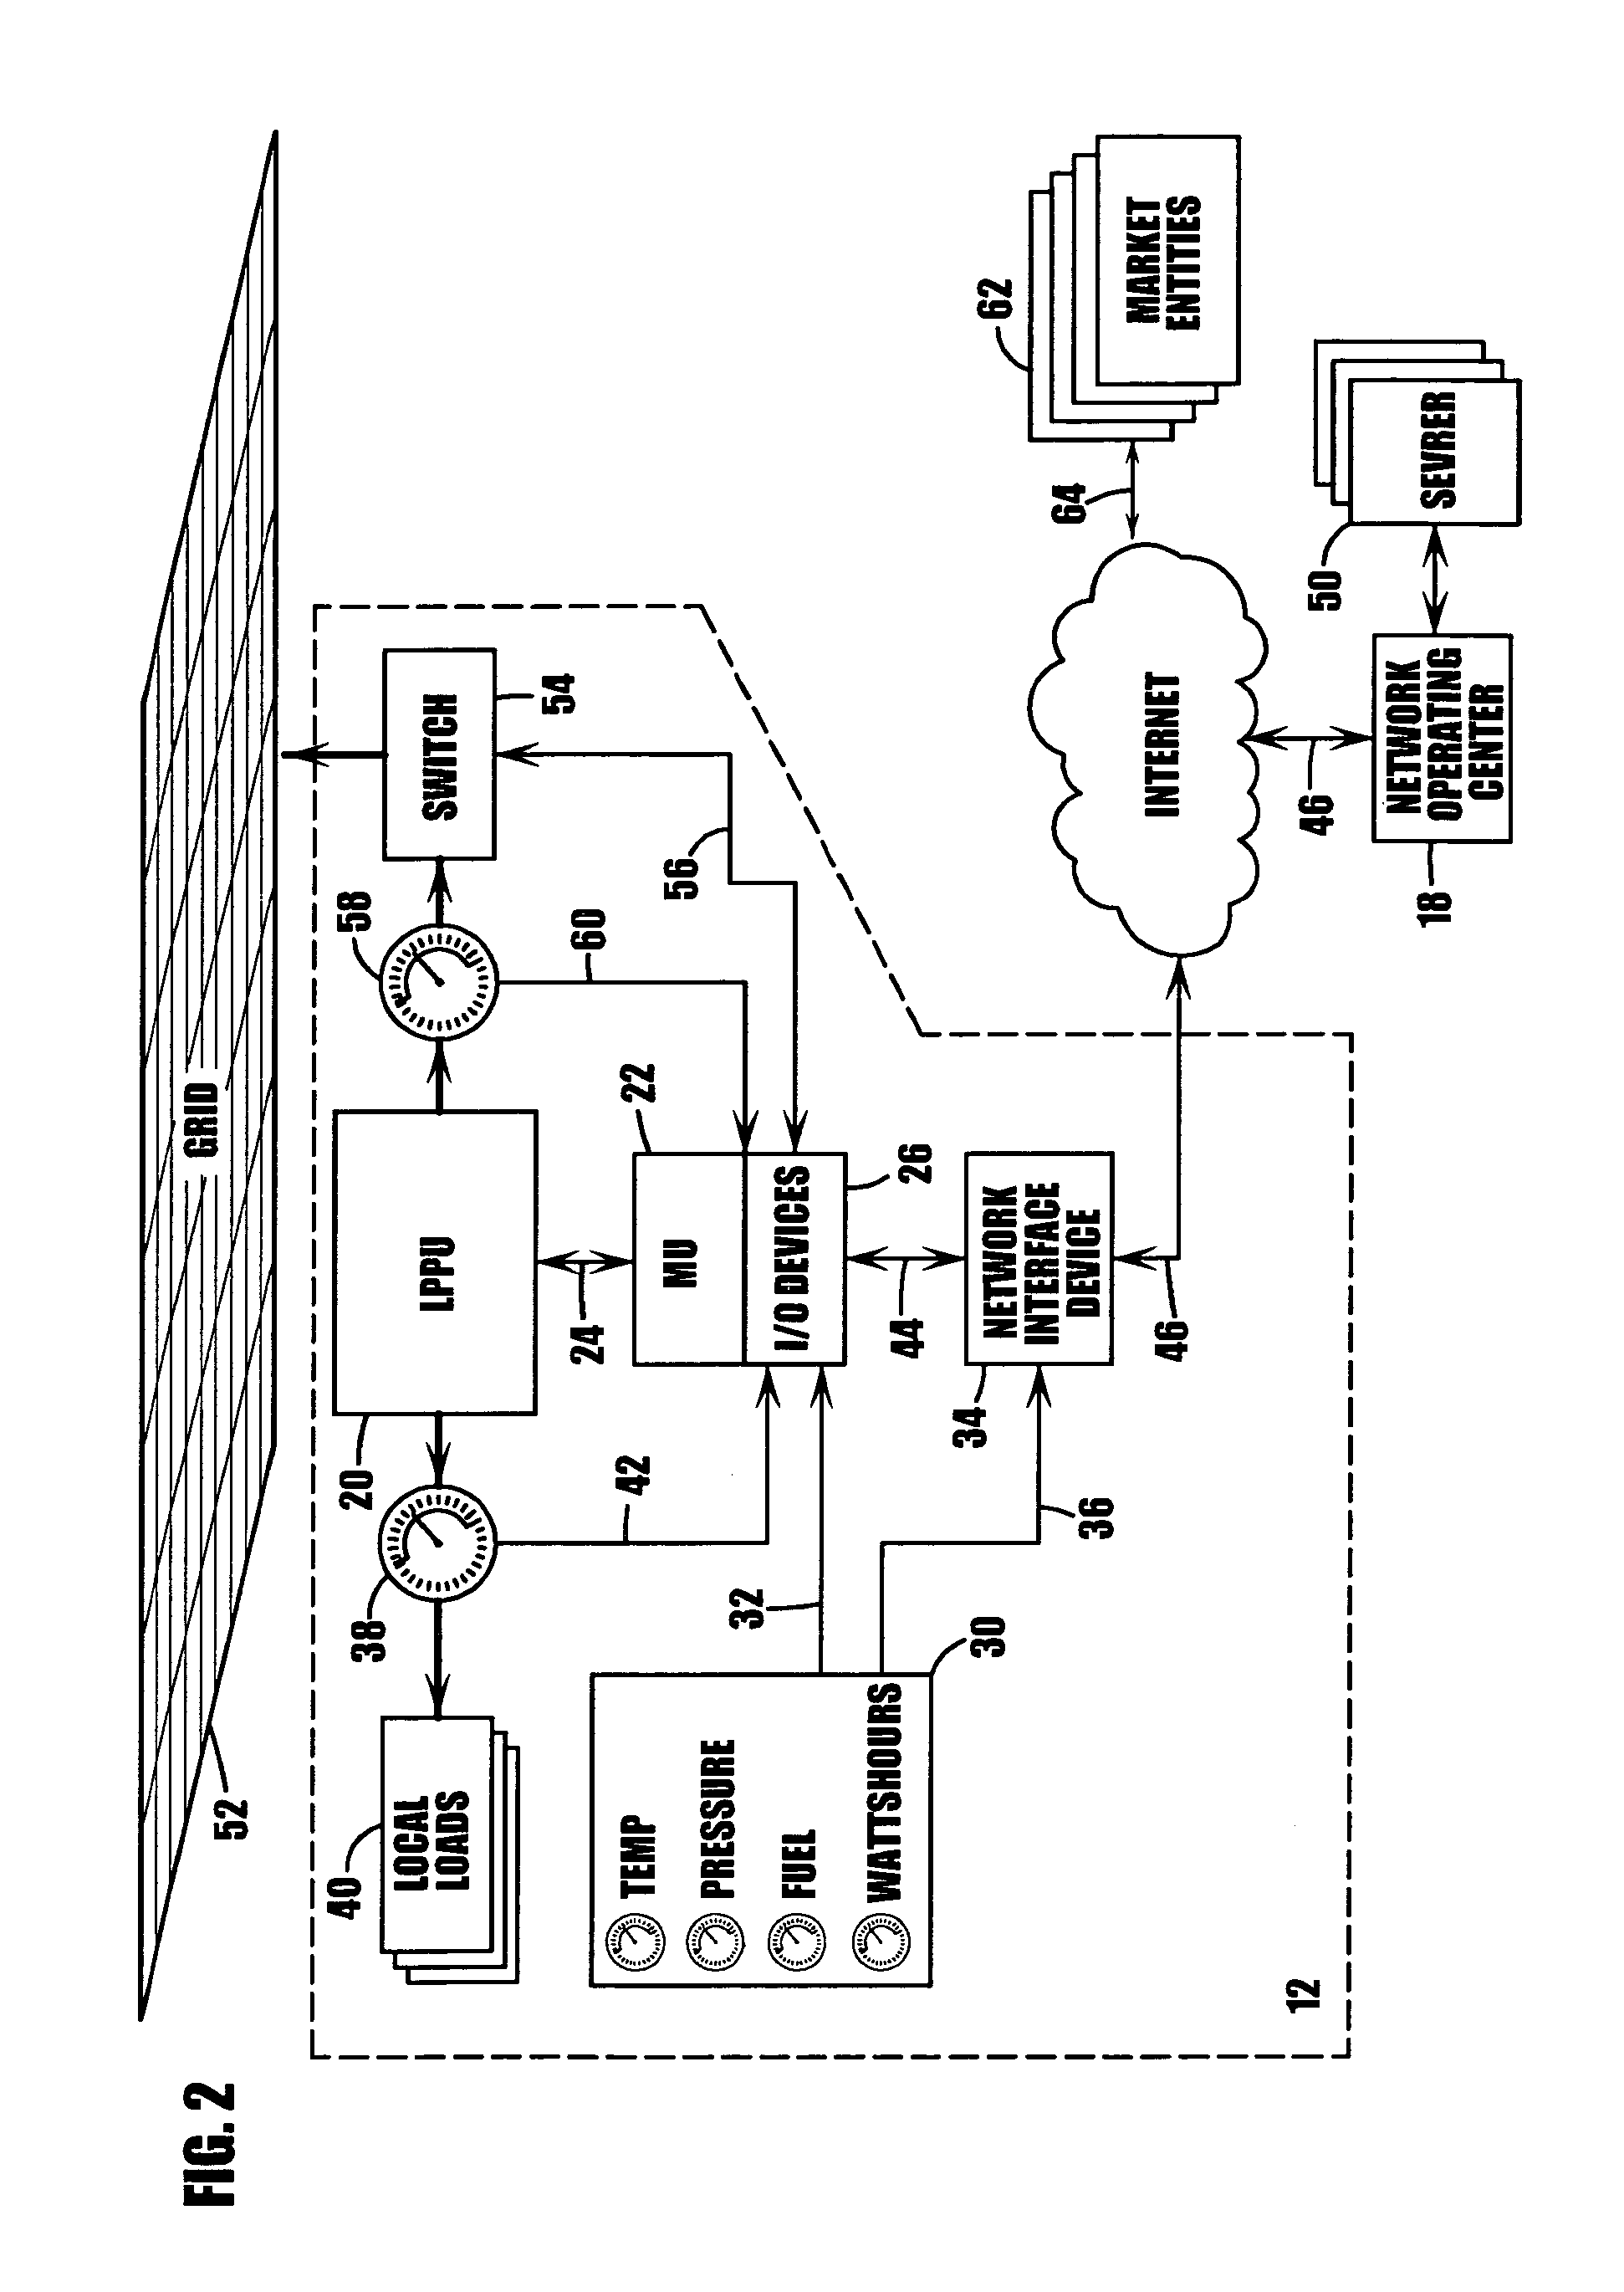 System and method for creating and operating an enhanced distributed energy network or virtual power plant